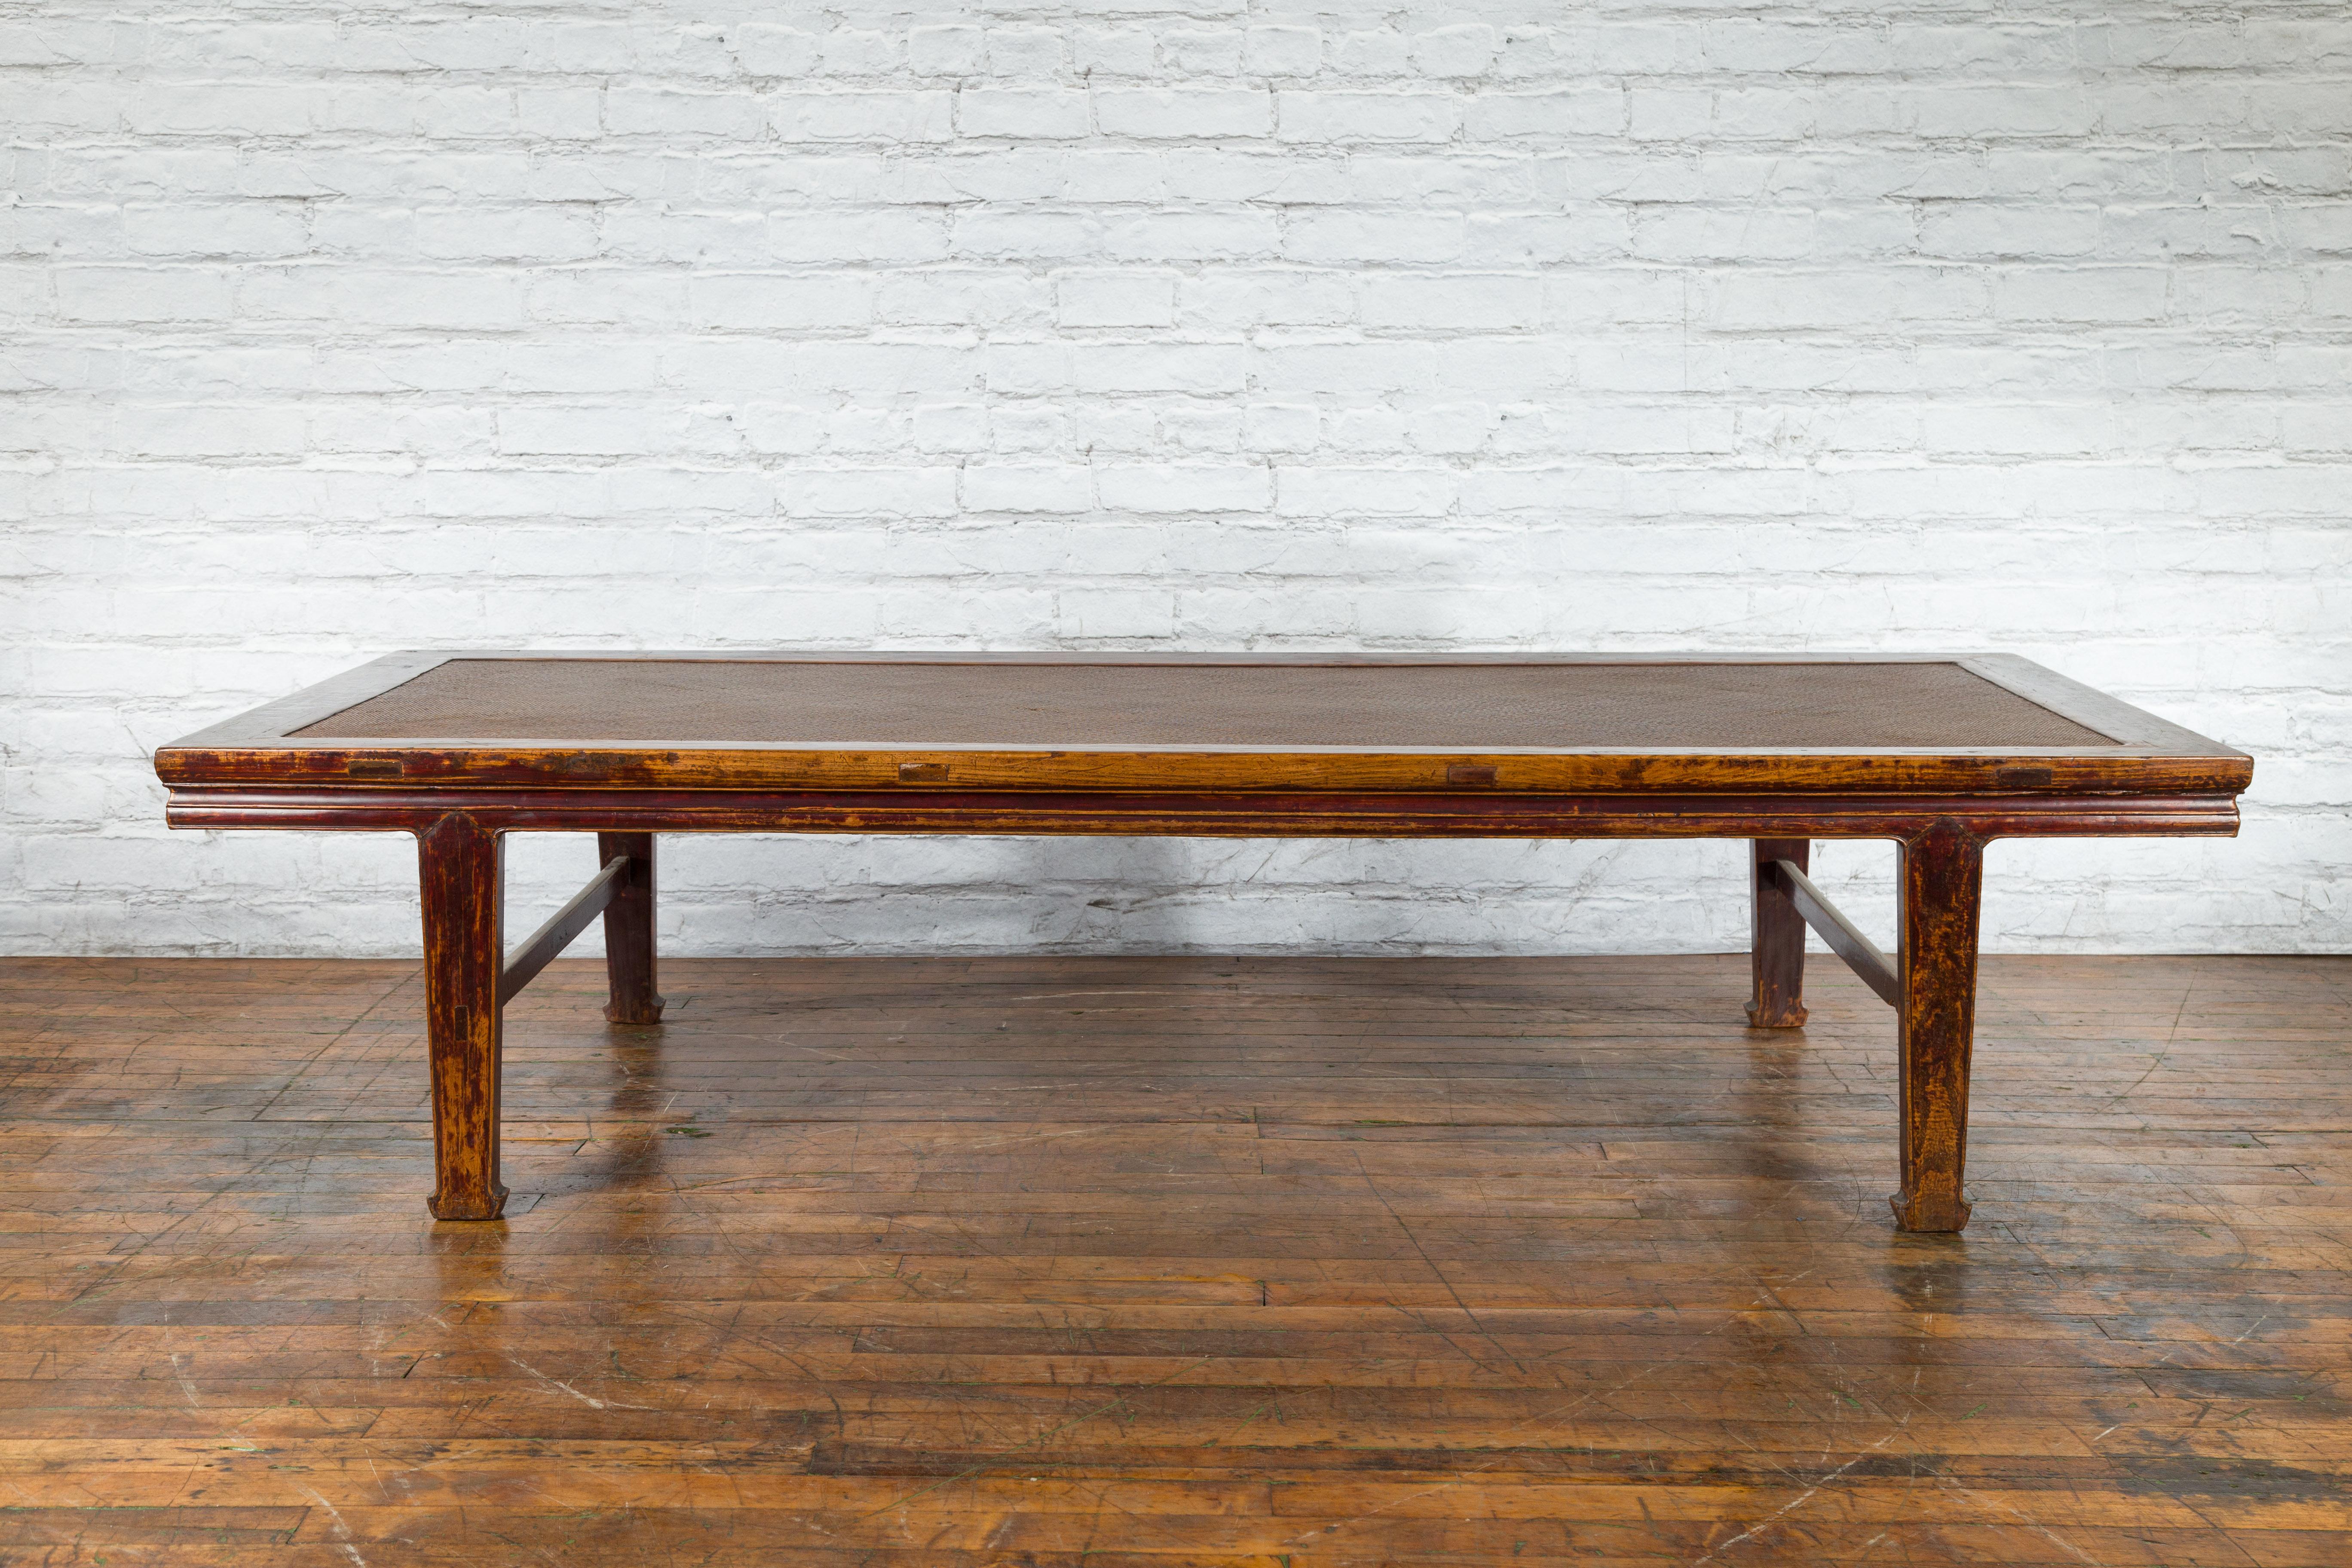 Chinese Qing Dynasty Elm Opium Bed Coffee Table with Rattan Top and Distressing For Sale 8